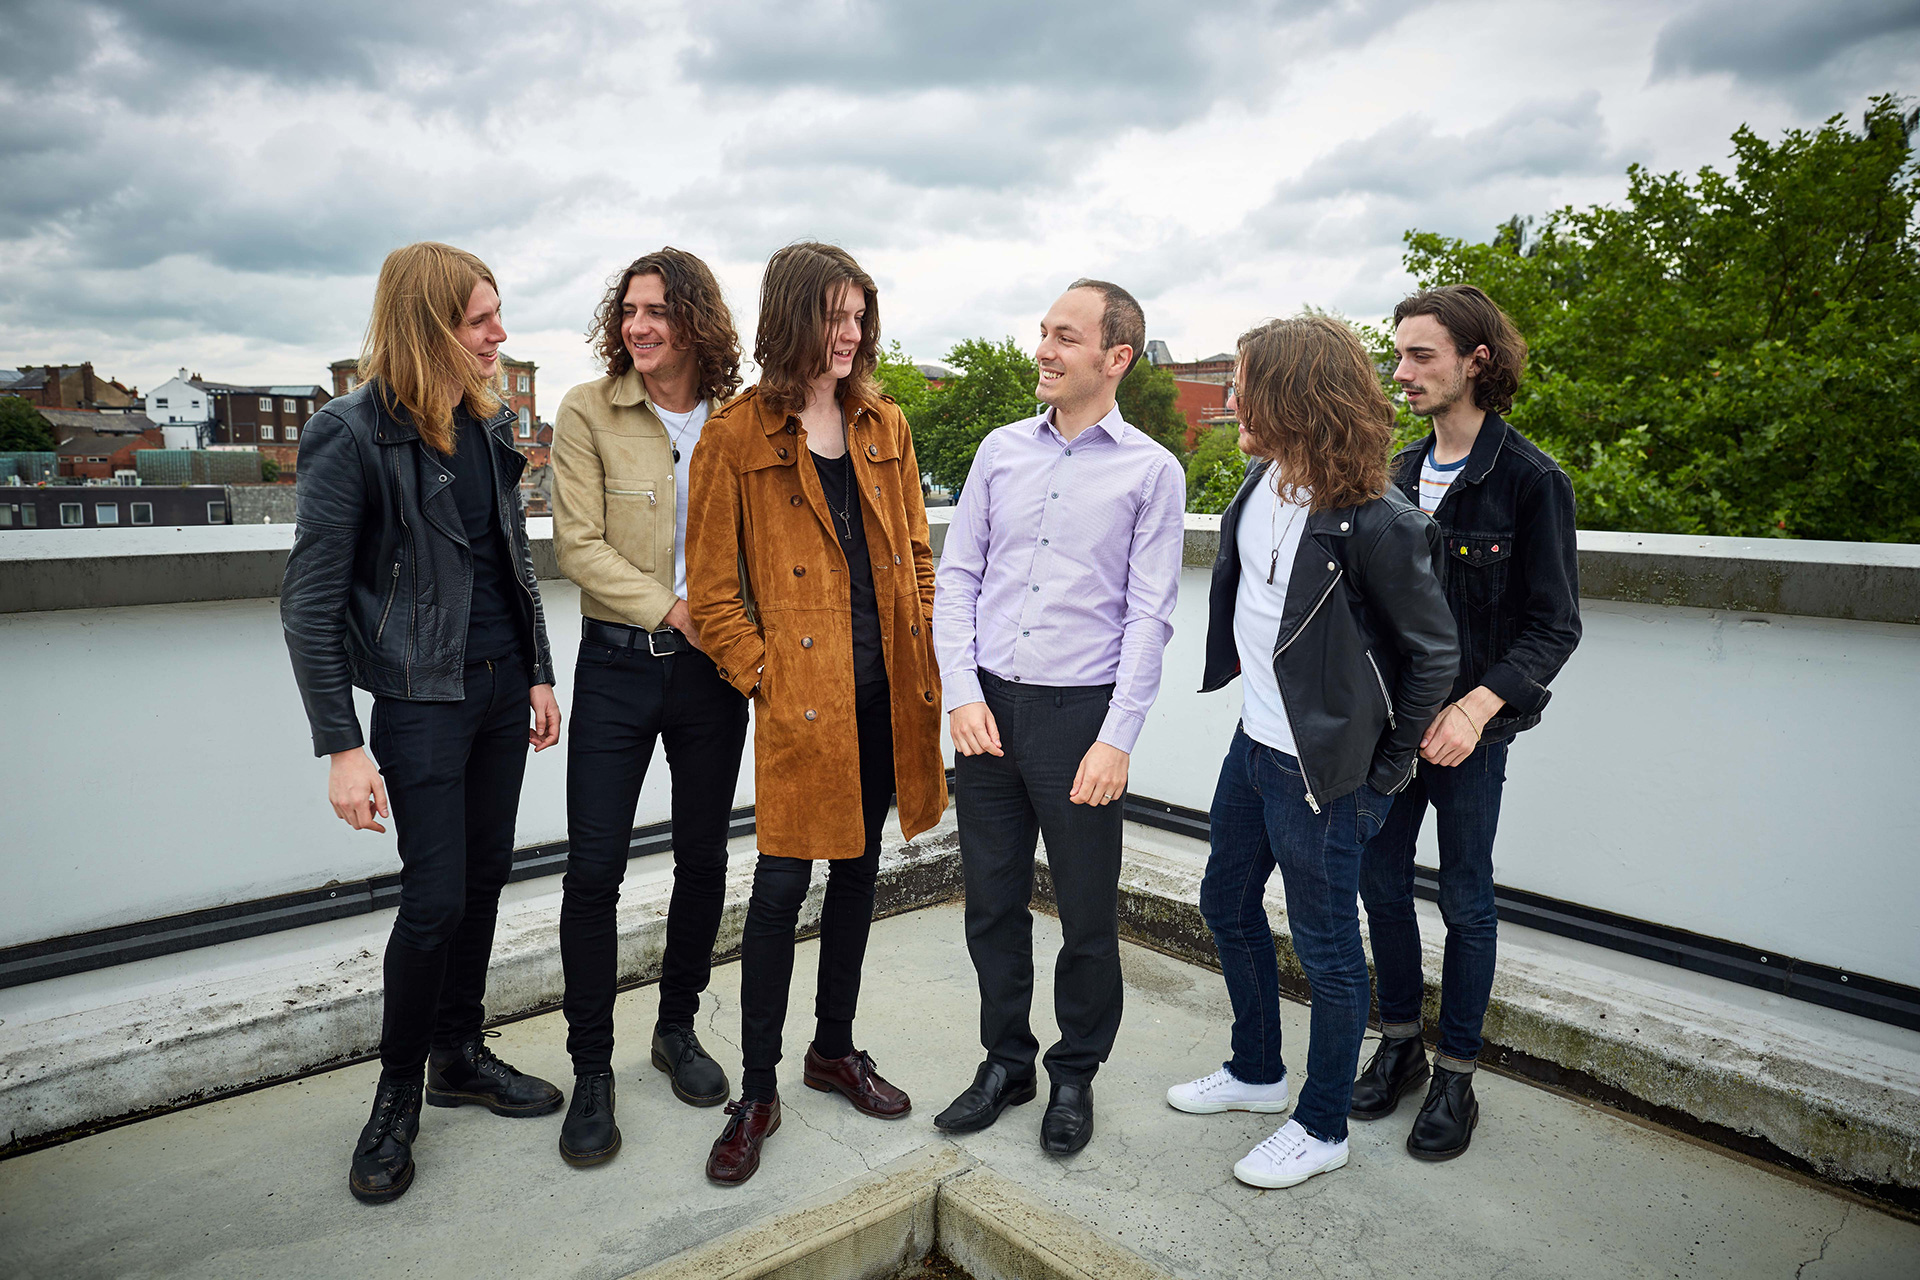 Council Leader pays tribute to Blossoms' debut album Anniversary 